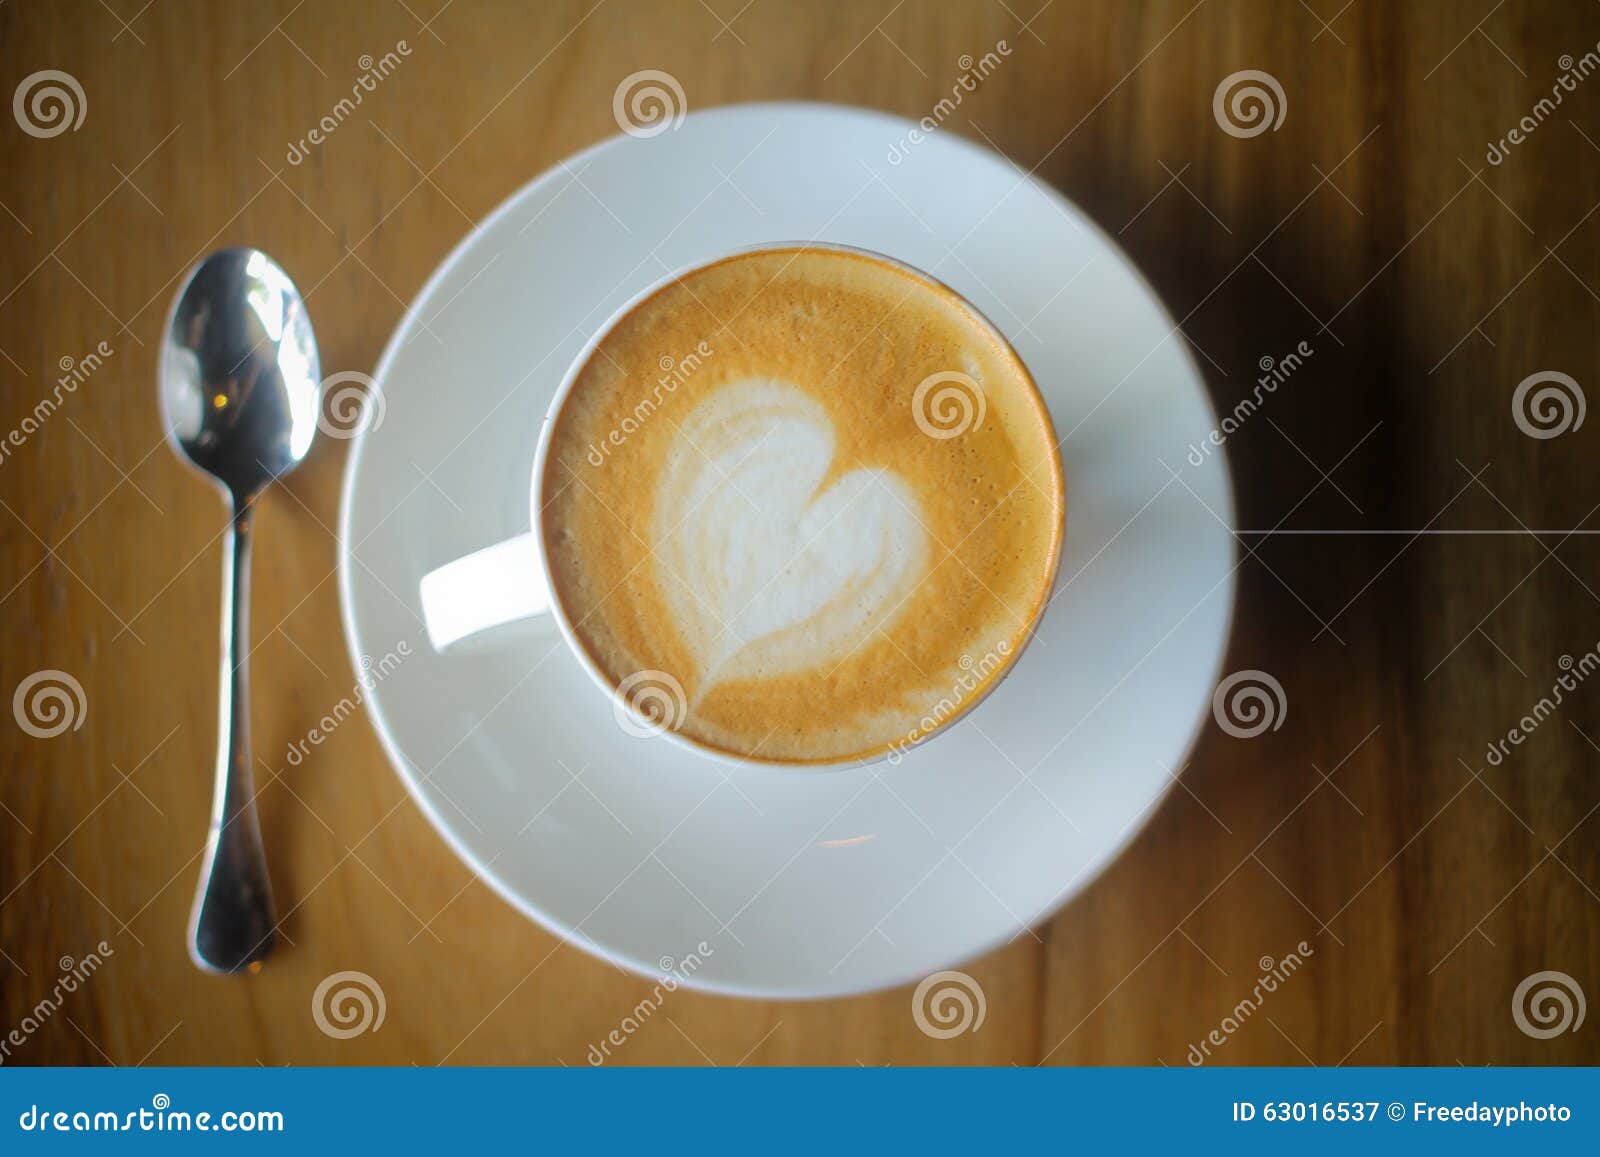 latte art on a cappucinno , on wooden table